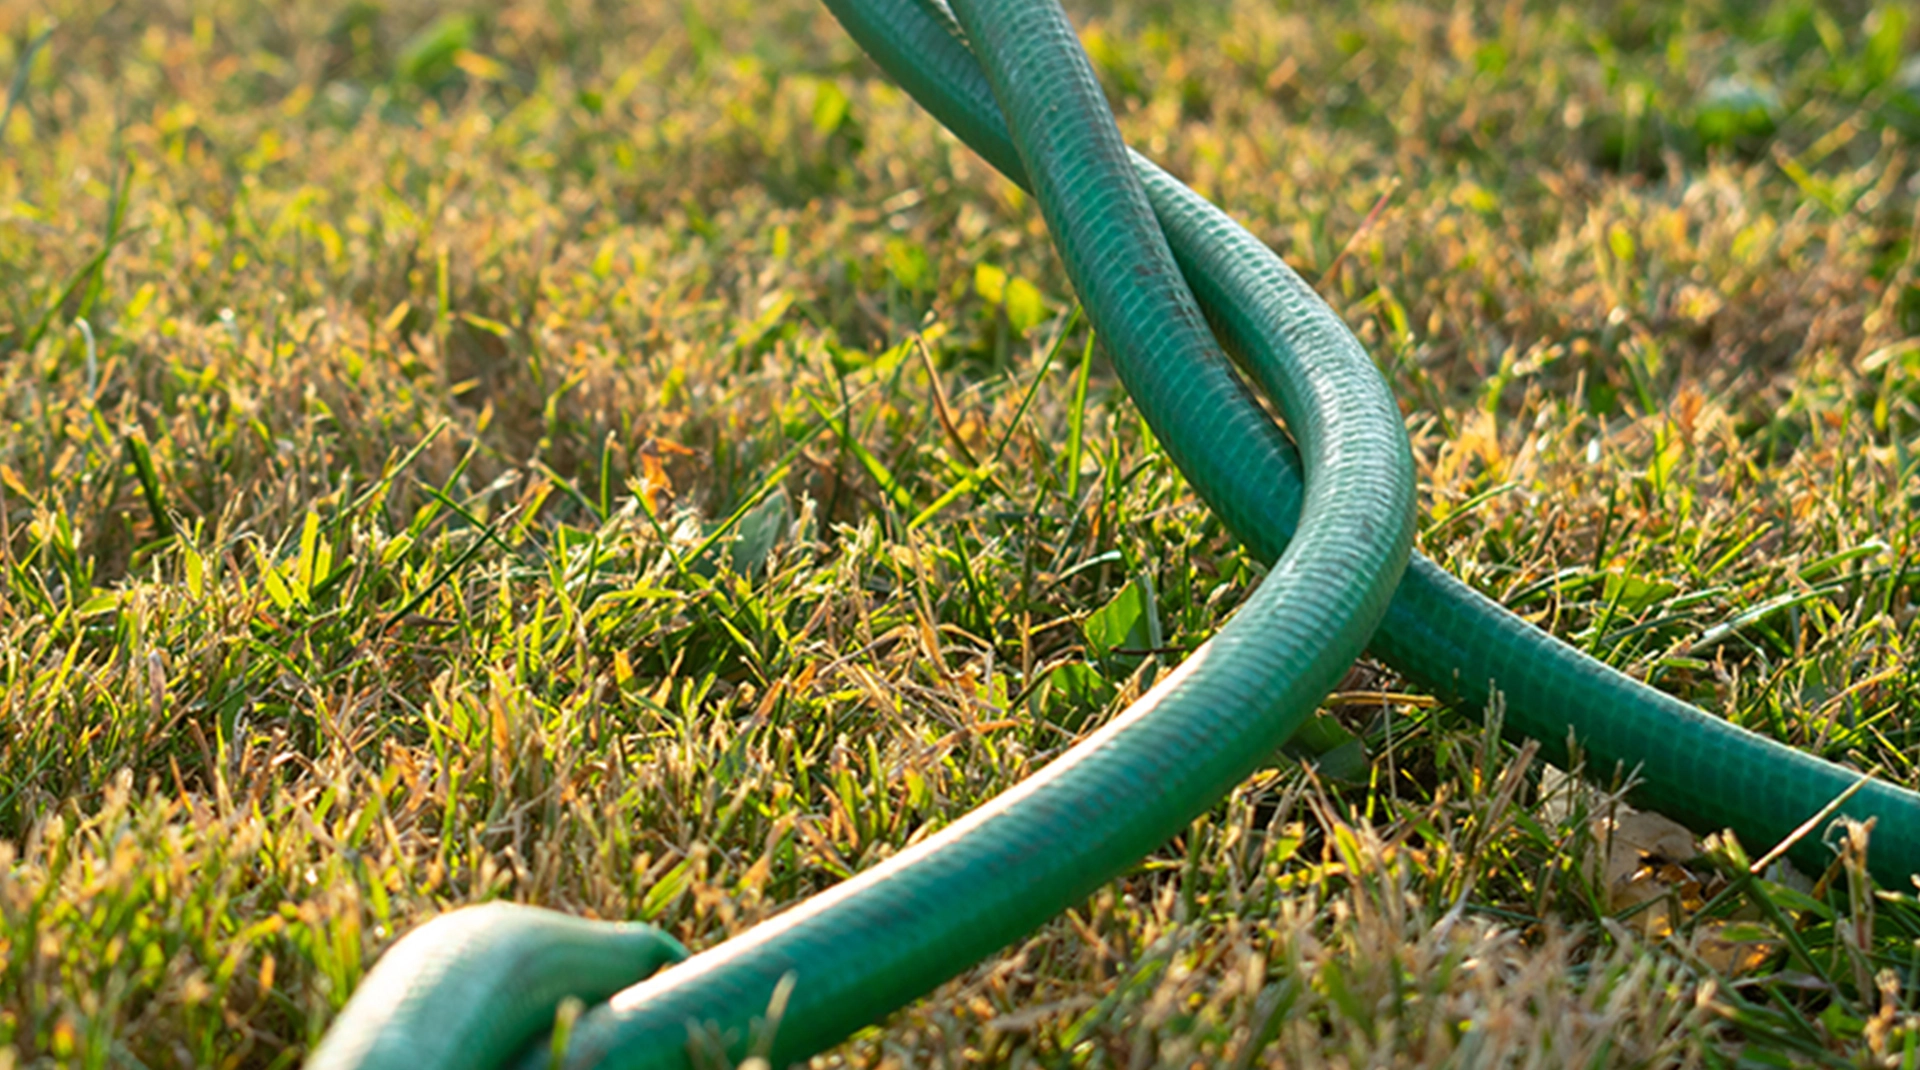 How To Choose The Right Garden Hose For Your Needs